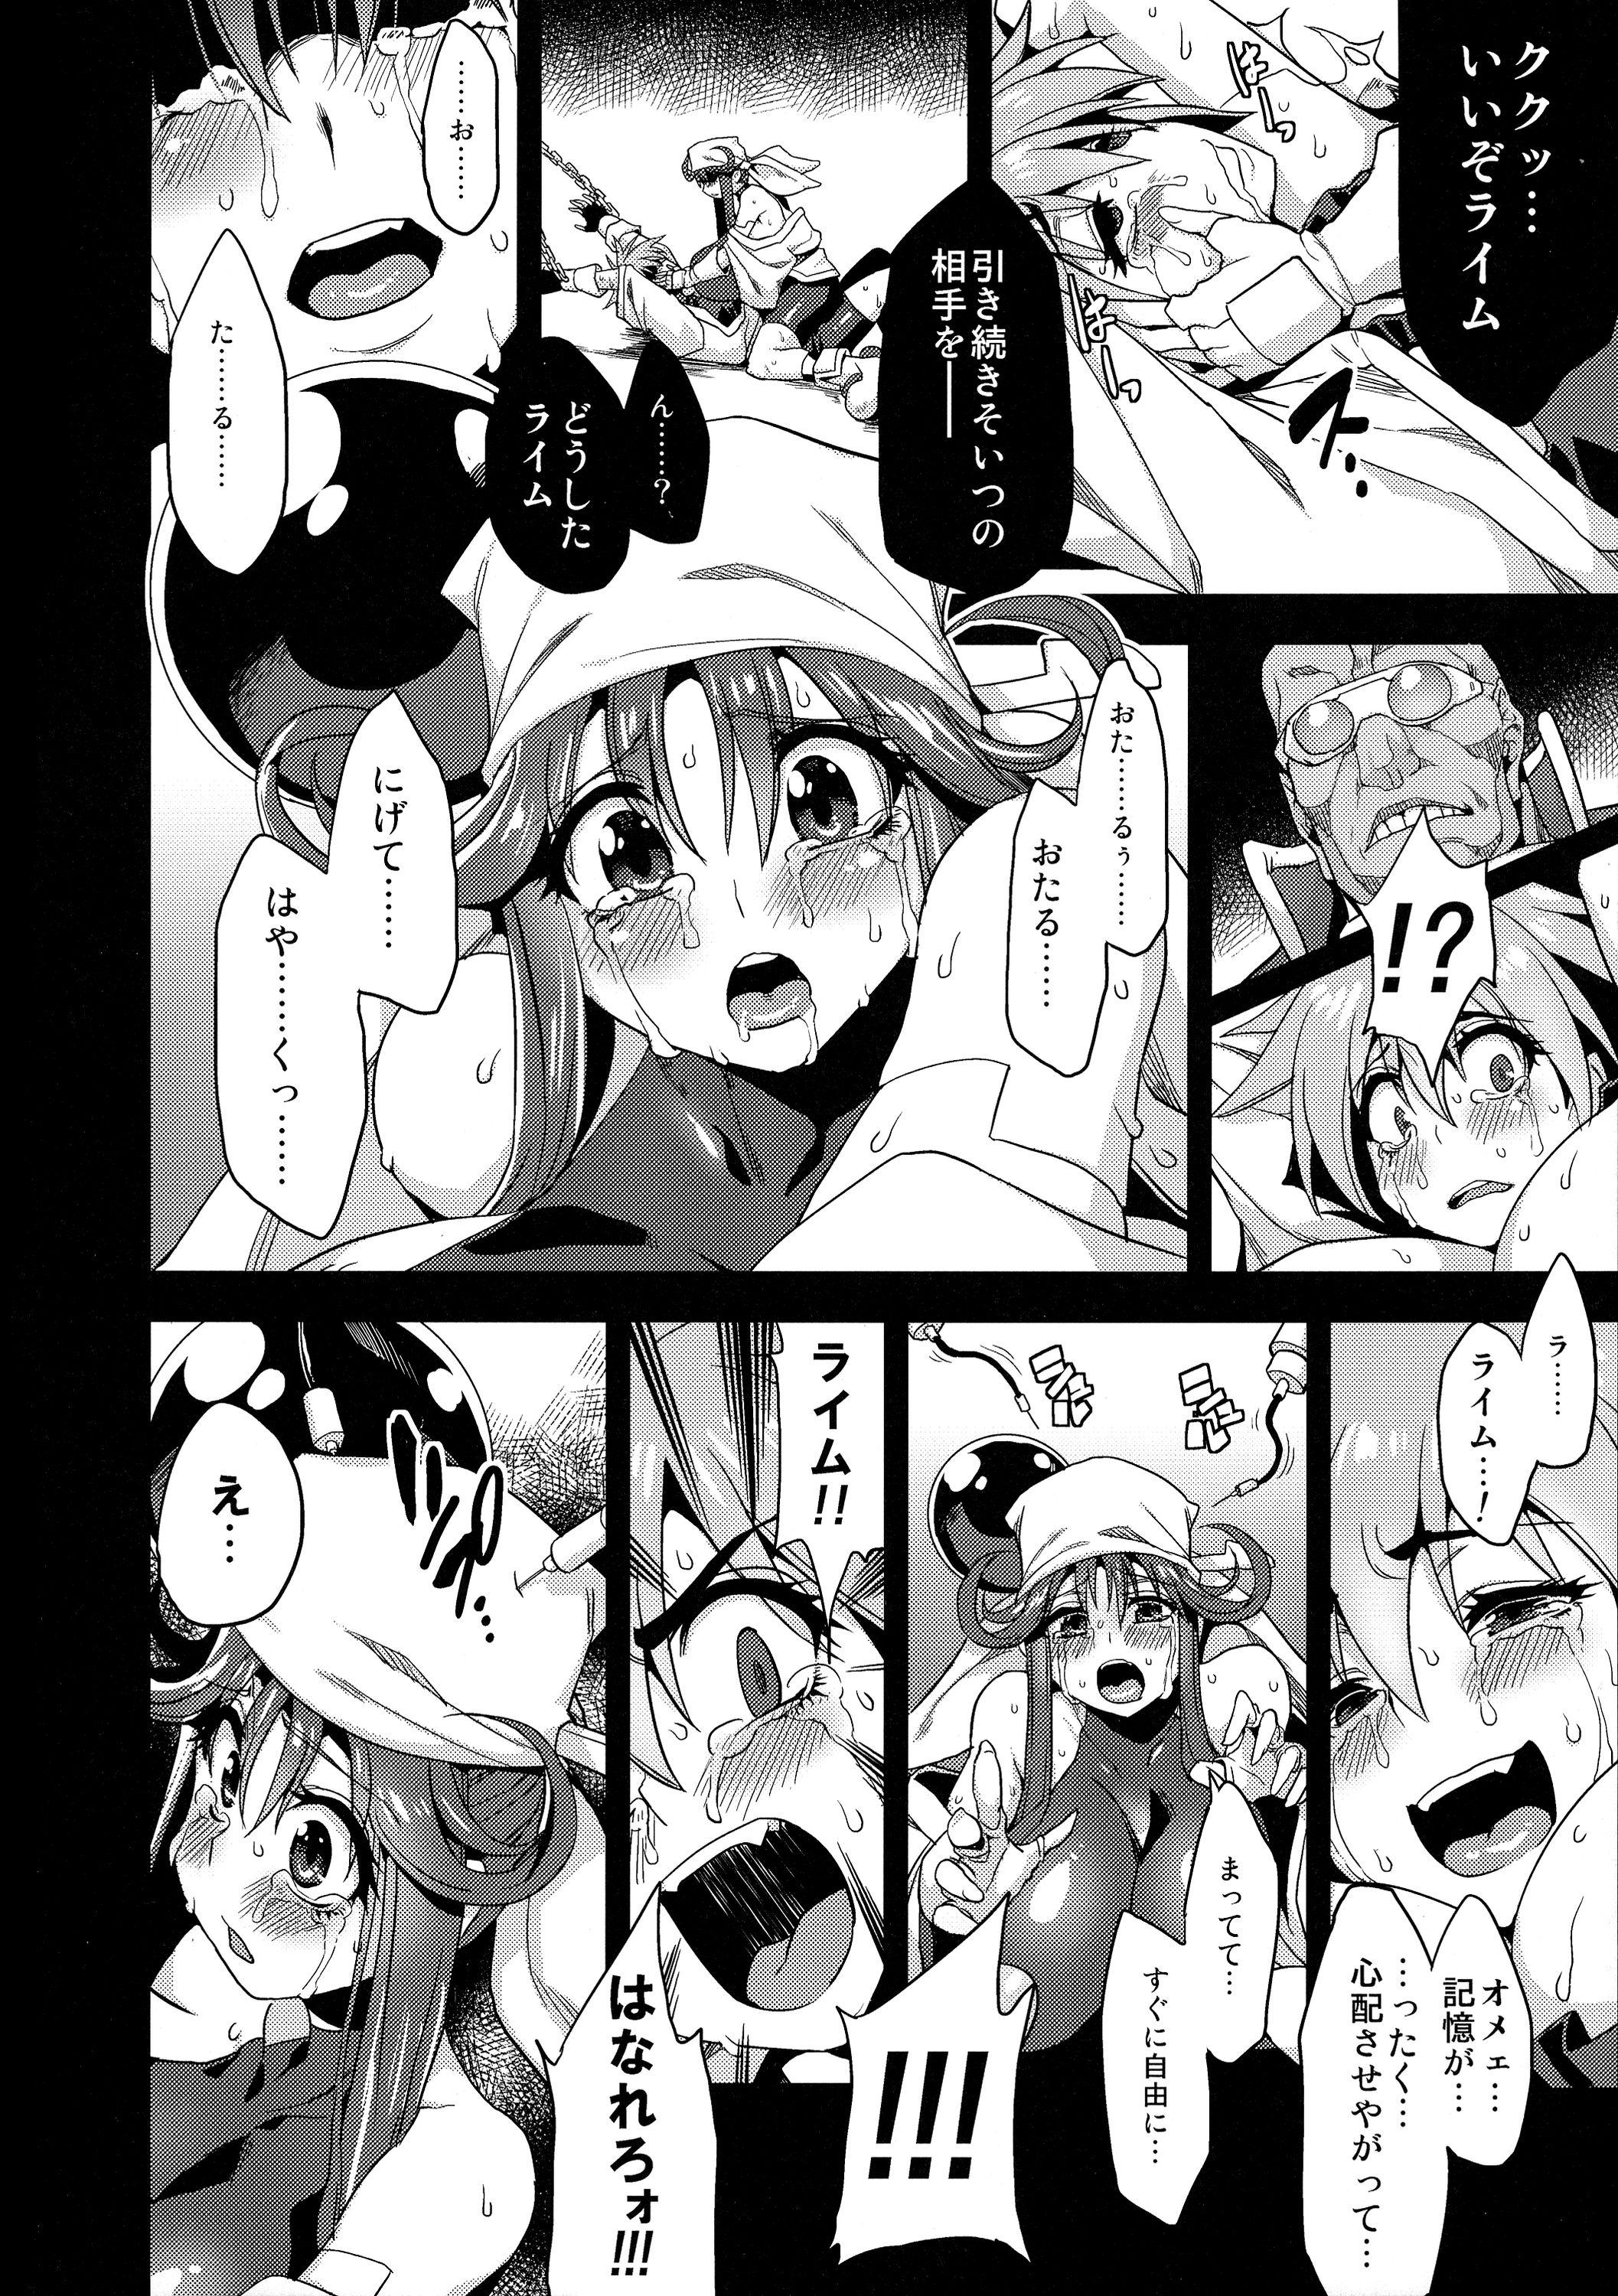 Glamour Hentai Marionette 3 - Saber marionette Bald Pussy - Page 10